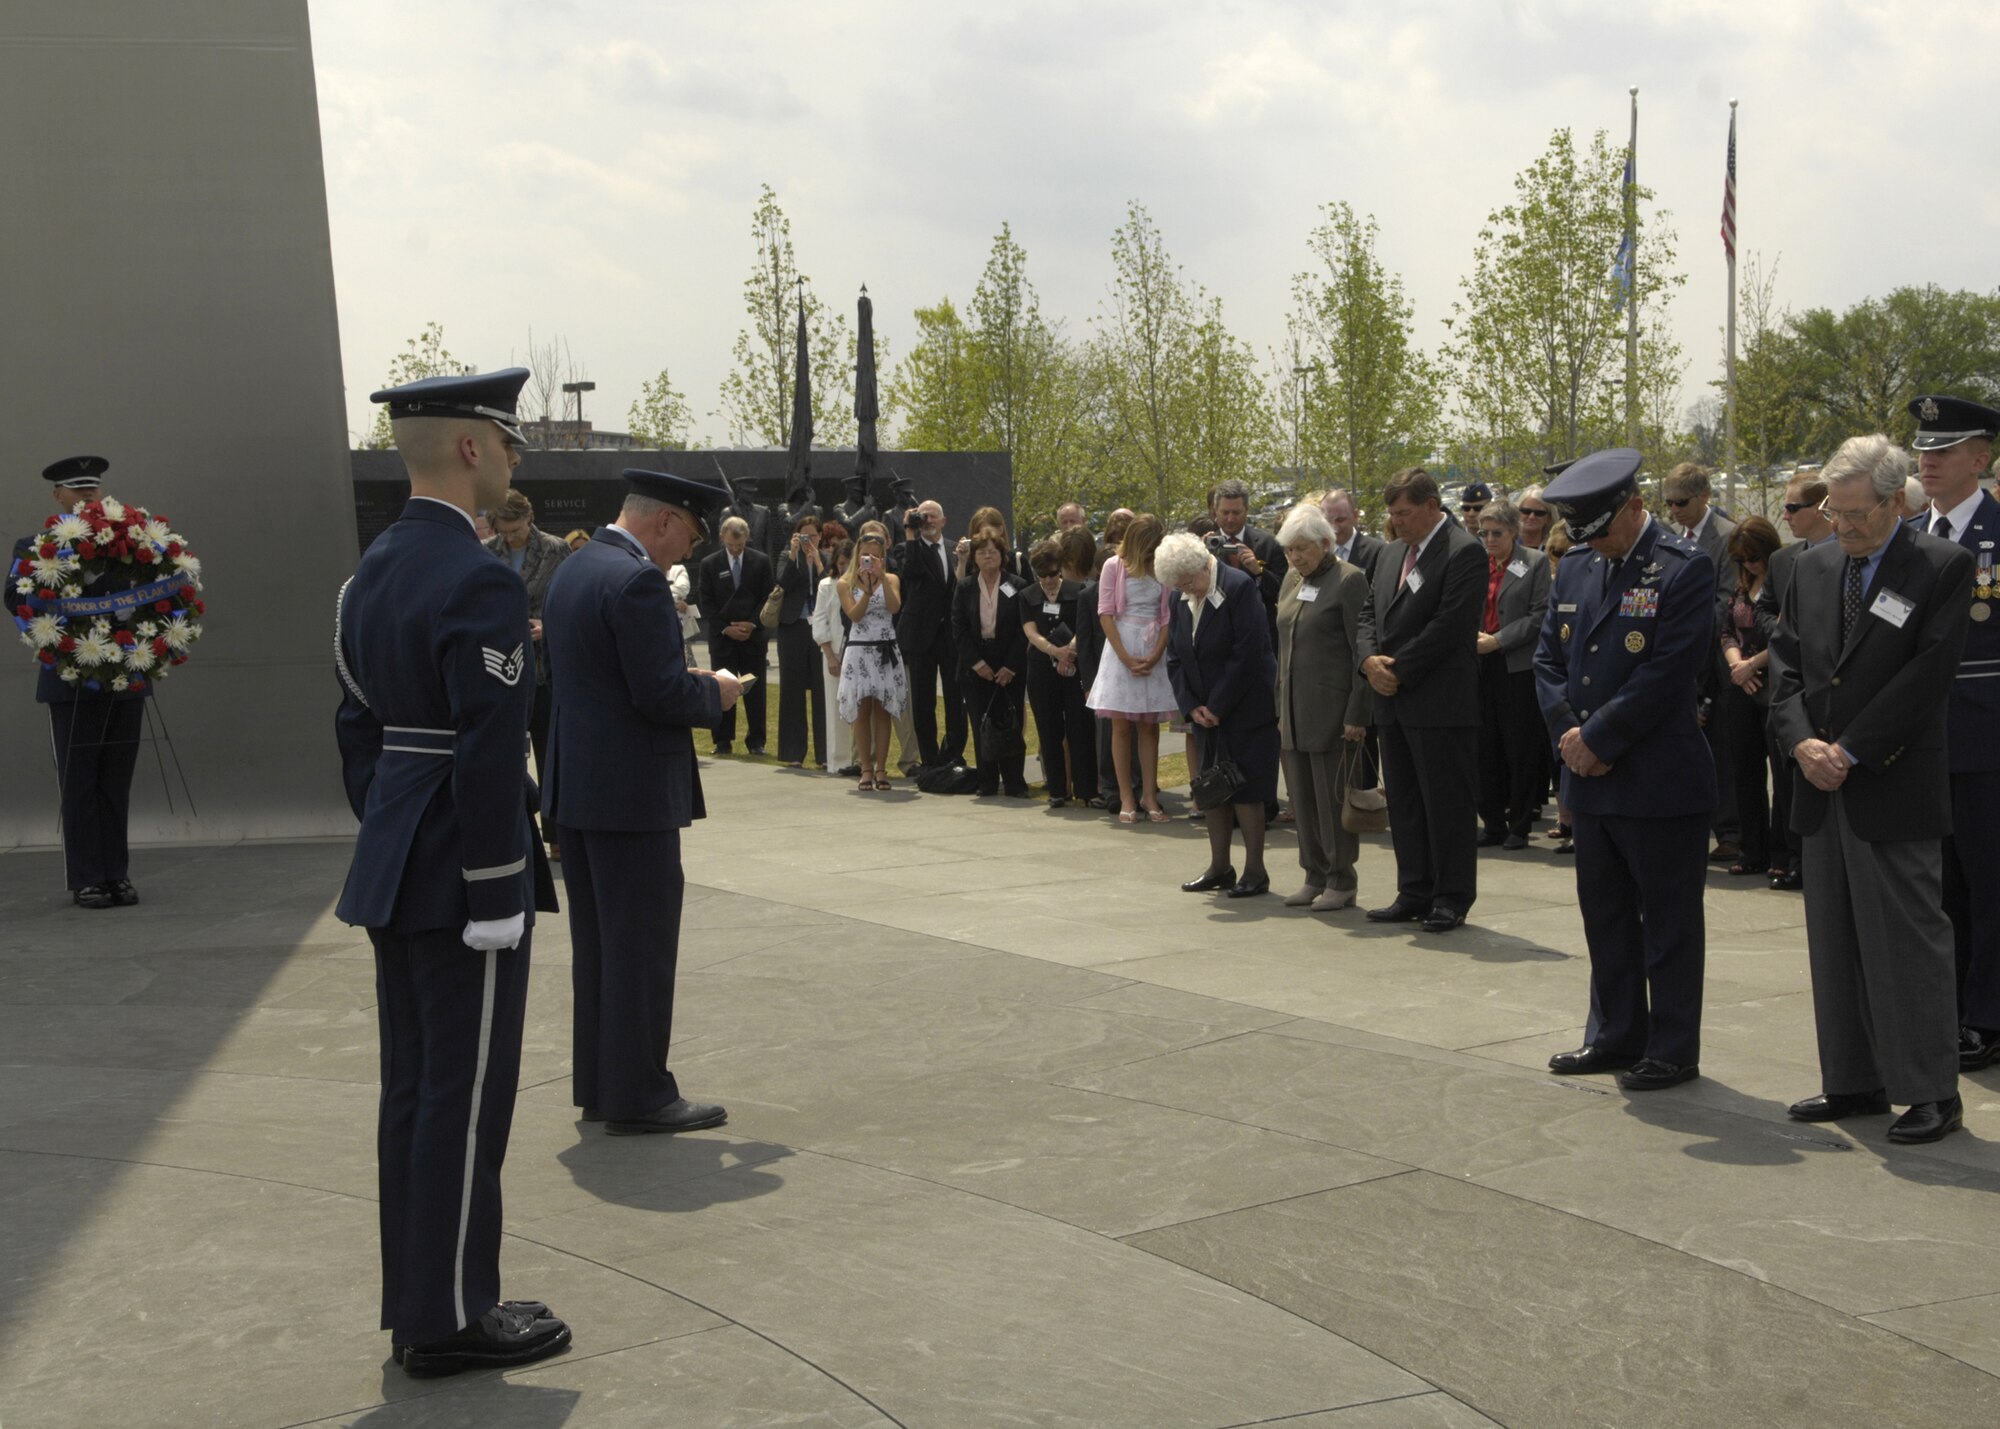 Chaplain (Brig. Gen.) Cecil R. Richardson gives the invocation during a wreath-laying ceremony in honor of the Flak Man crew at the Air Force Memorial, Arlington, Va., April 24. The wreath was placed by Edward McNally, the Bombardier of the B-24 Bomber, The Flak Man, in honor of the former crew members of the Flak Man who dedicated their lives to the cause of freedom. (U.S. Air Force photo by Senior Airman Rusti Caraker)